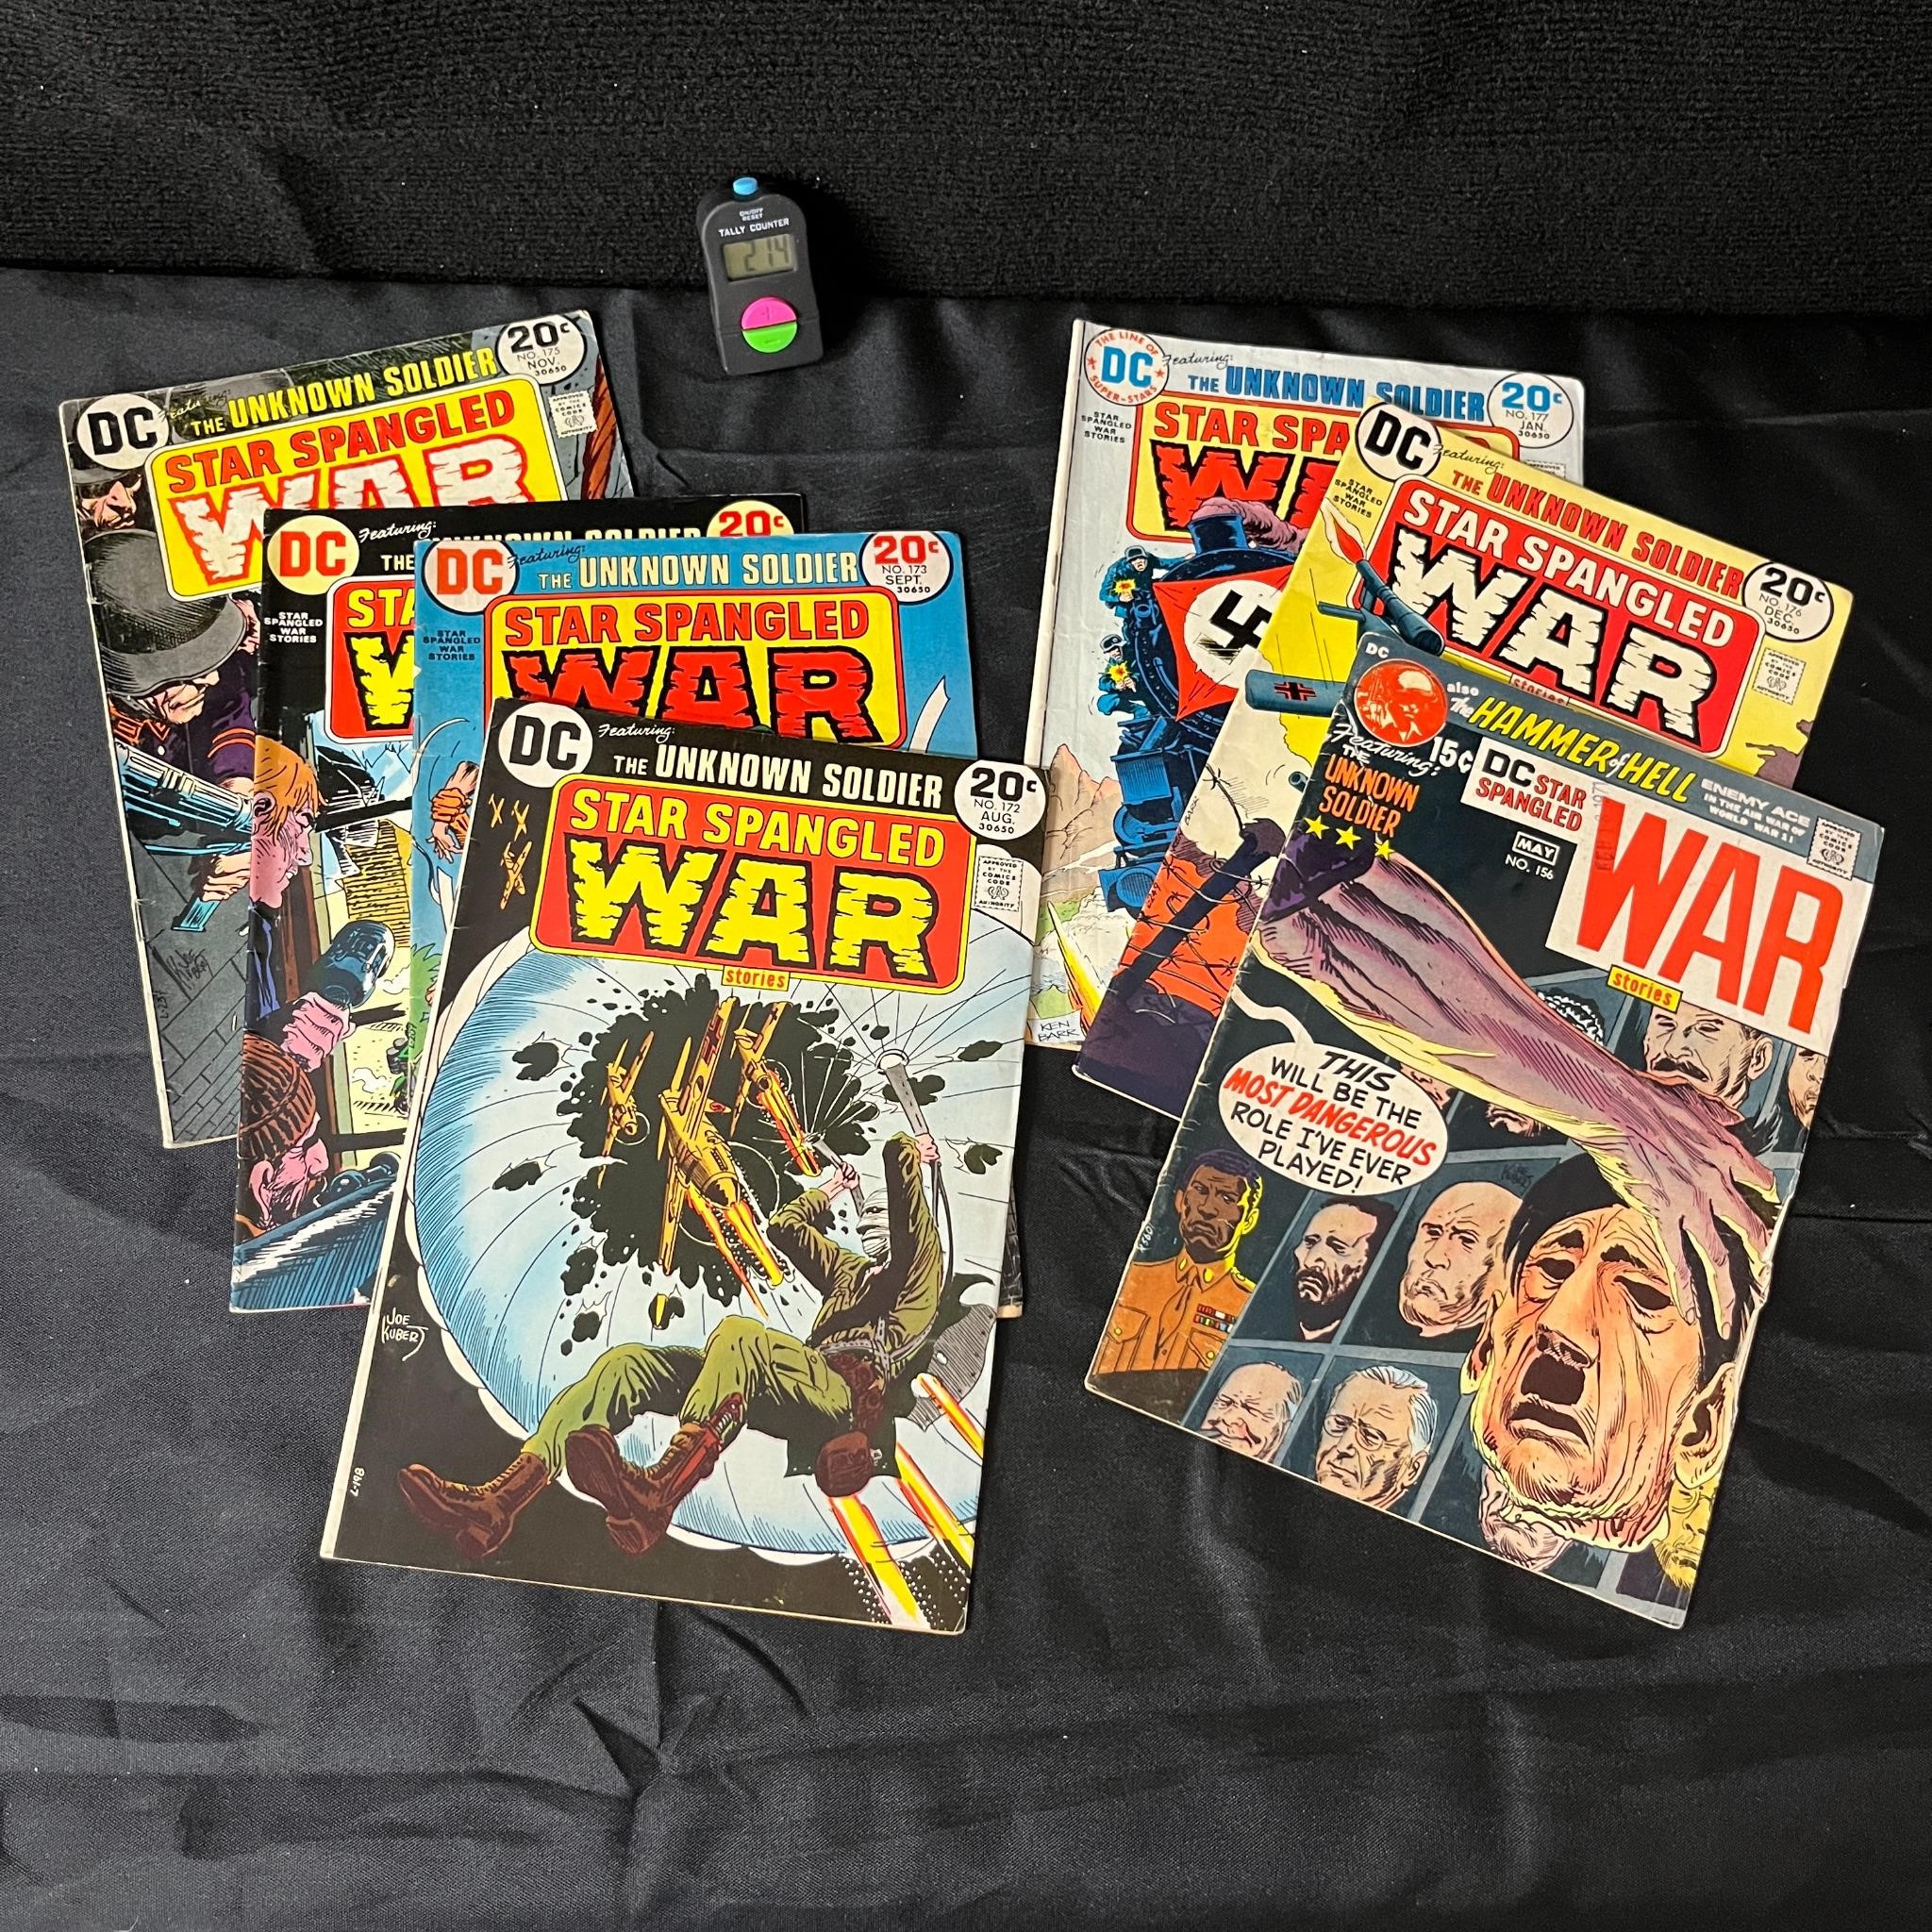 Star Spangled War Story Feat. Unknown Soldier Lot